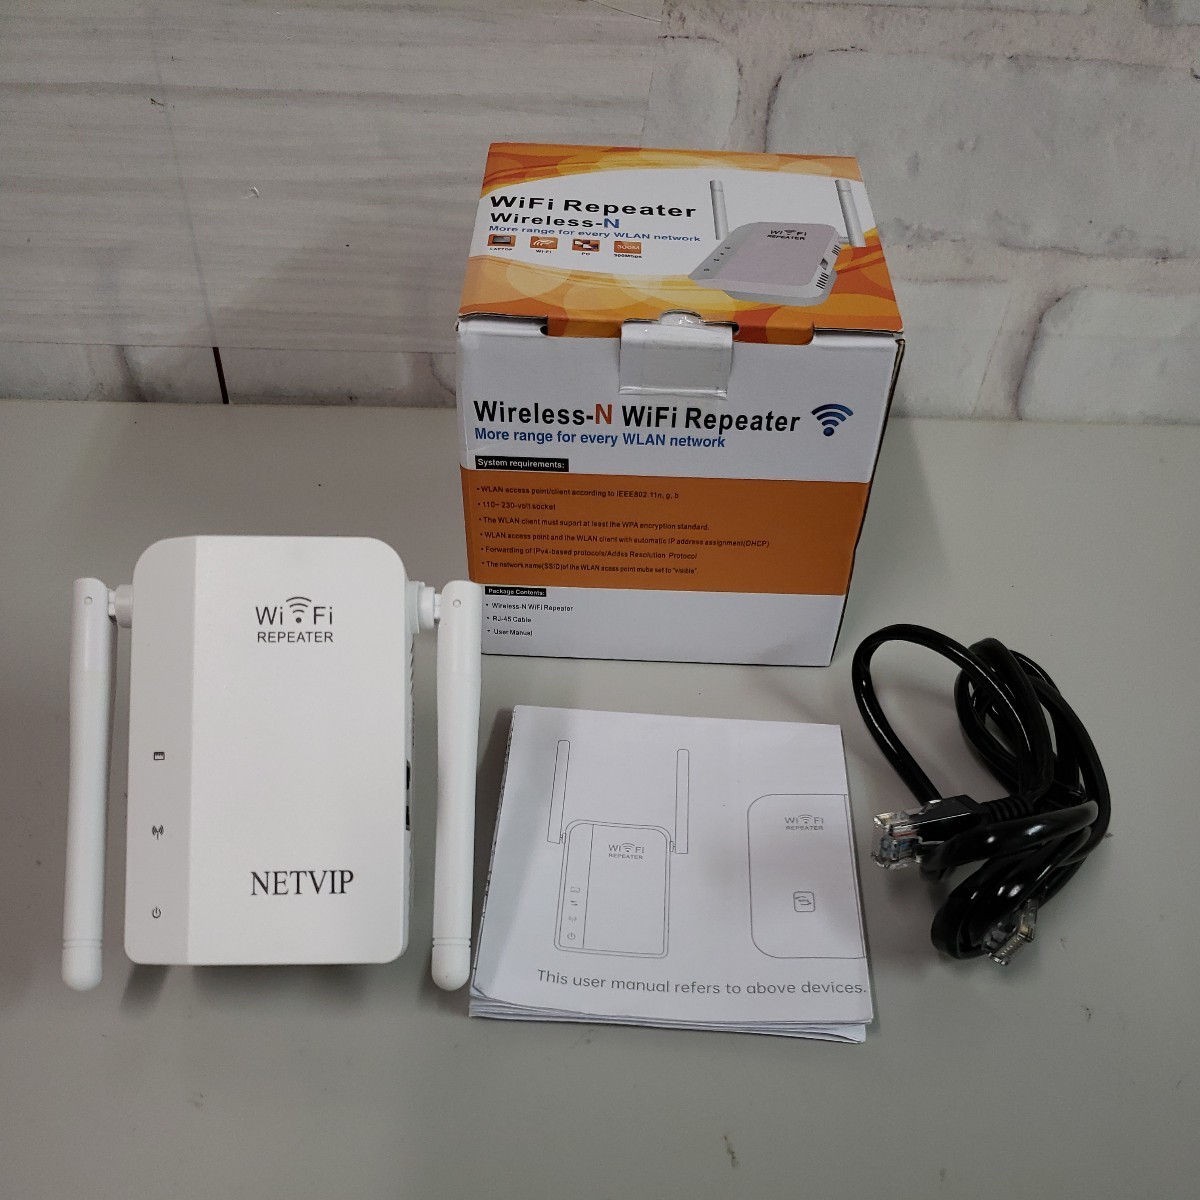 510y3015*NETVIP WiFi relay vessel wireless LAN relay machine wireless repeat customer / access Point wifi booster wifi increase width vessel signal improvement radio wave increase a little over enlargement 